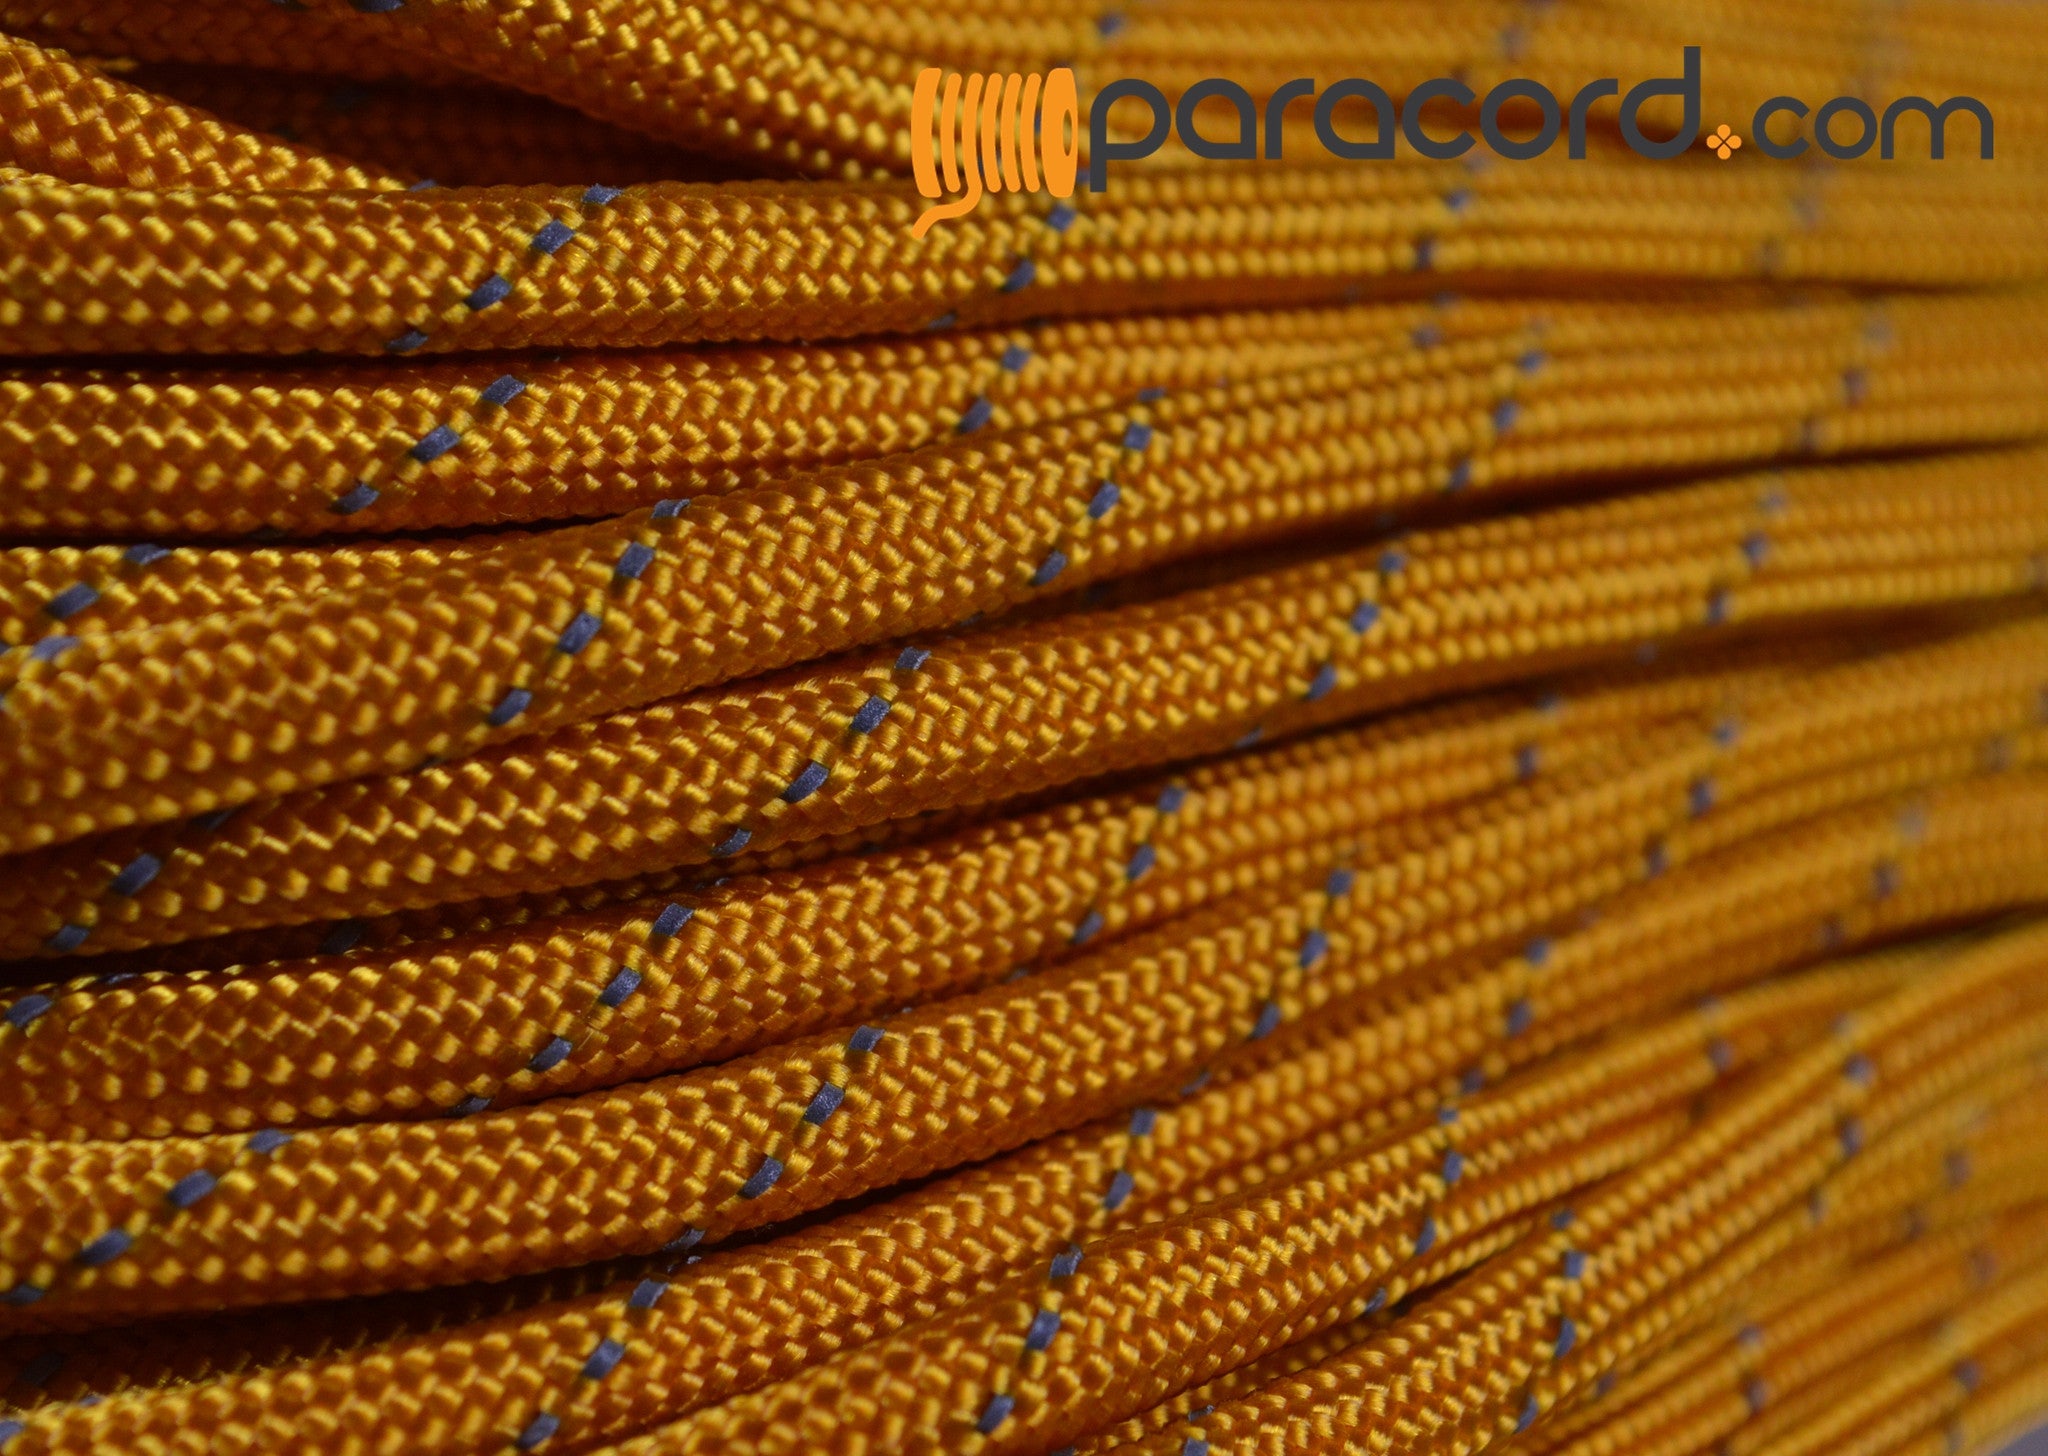 Reflective Tracer Goldenrod Paracord